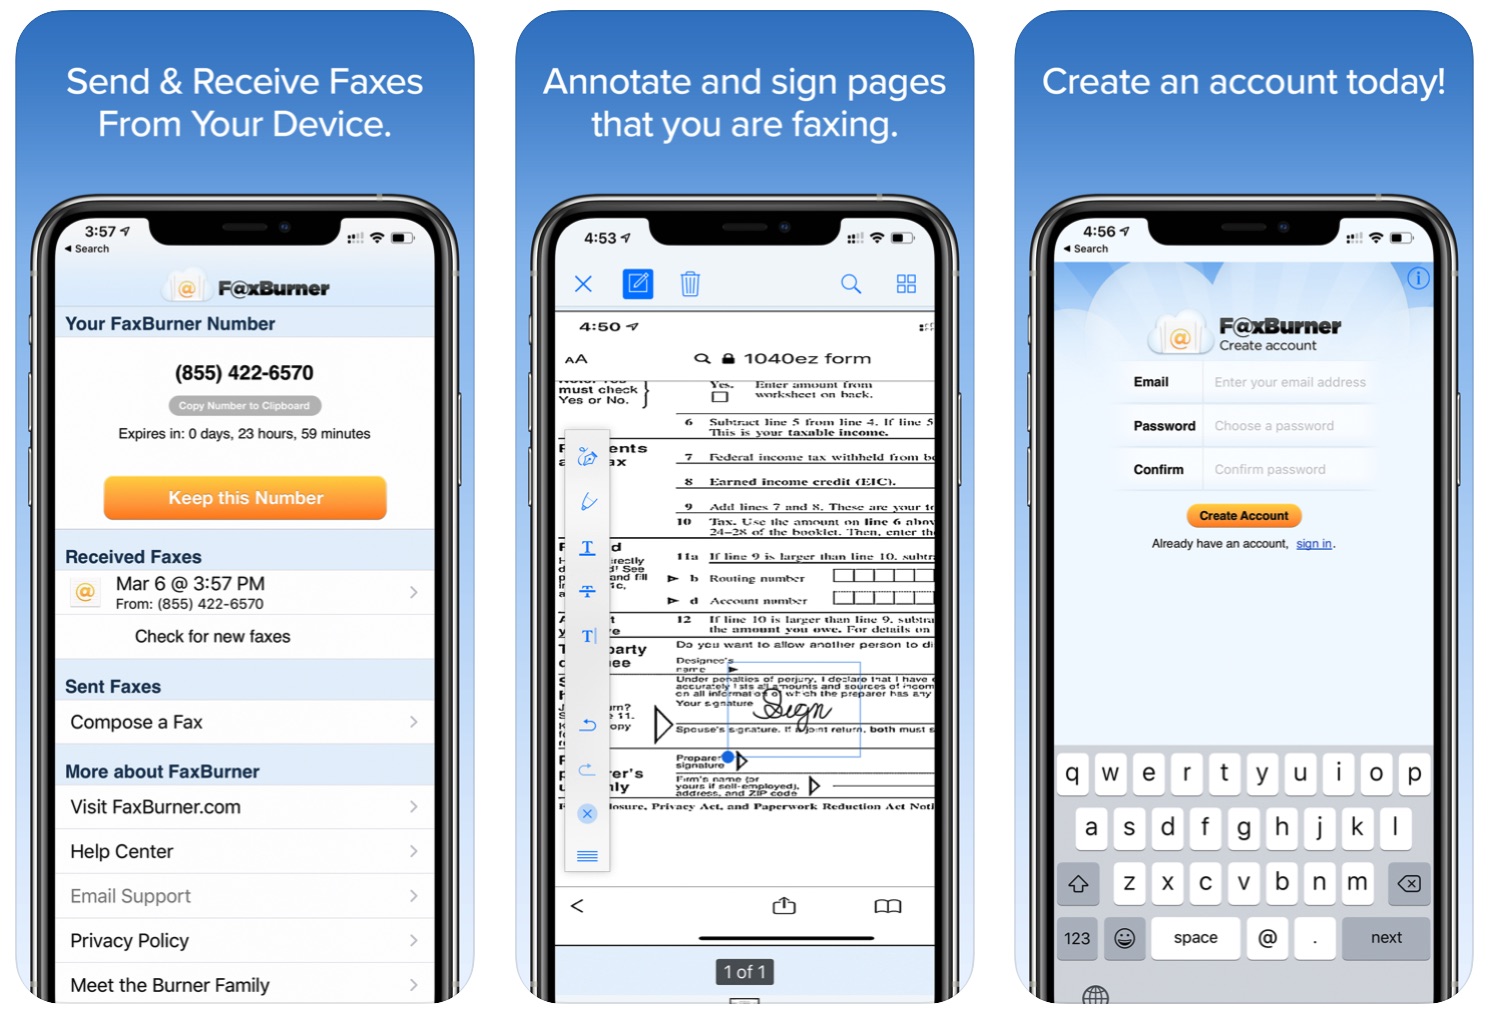 How to receive and send fax with iPhone and iPad Fax Burner app